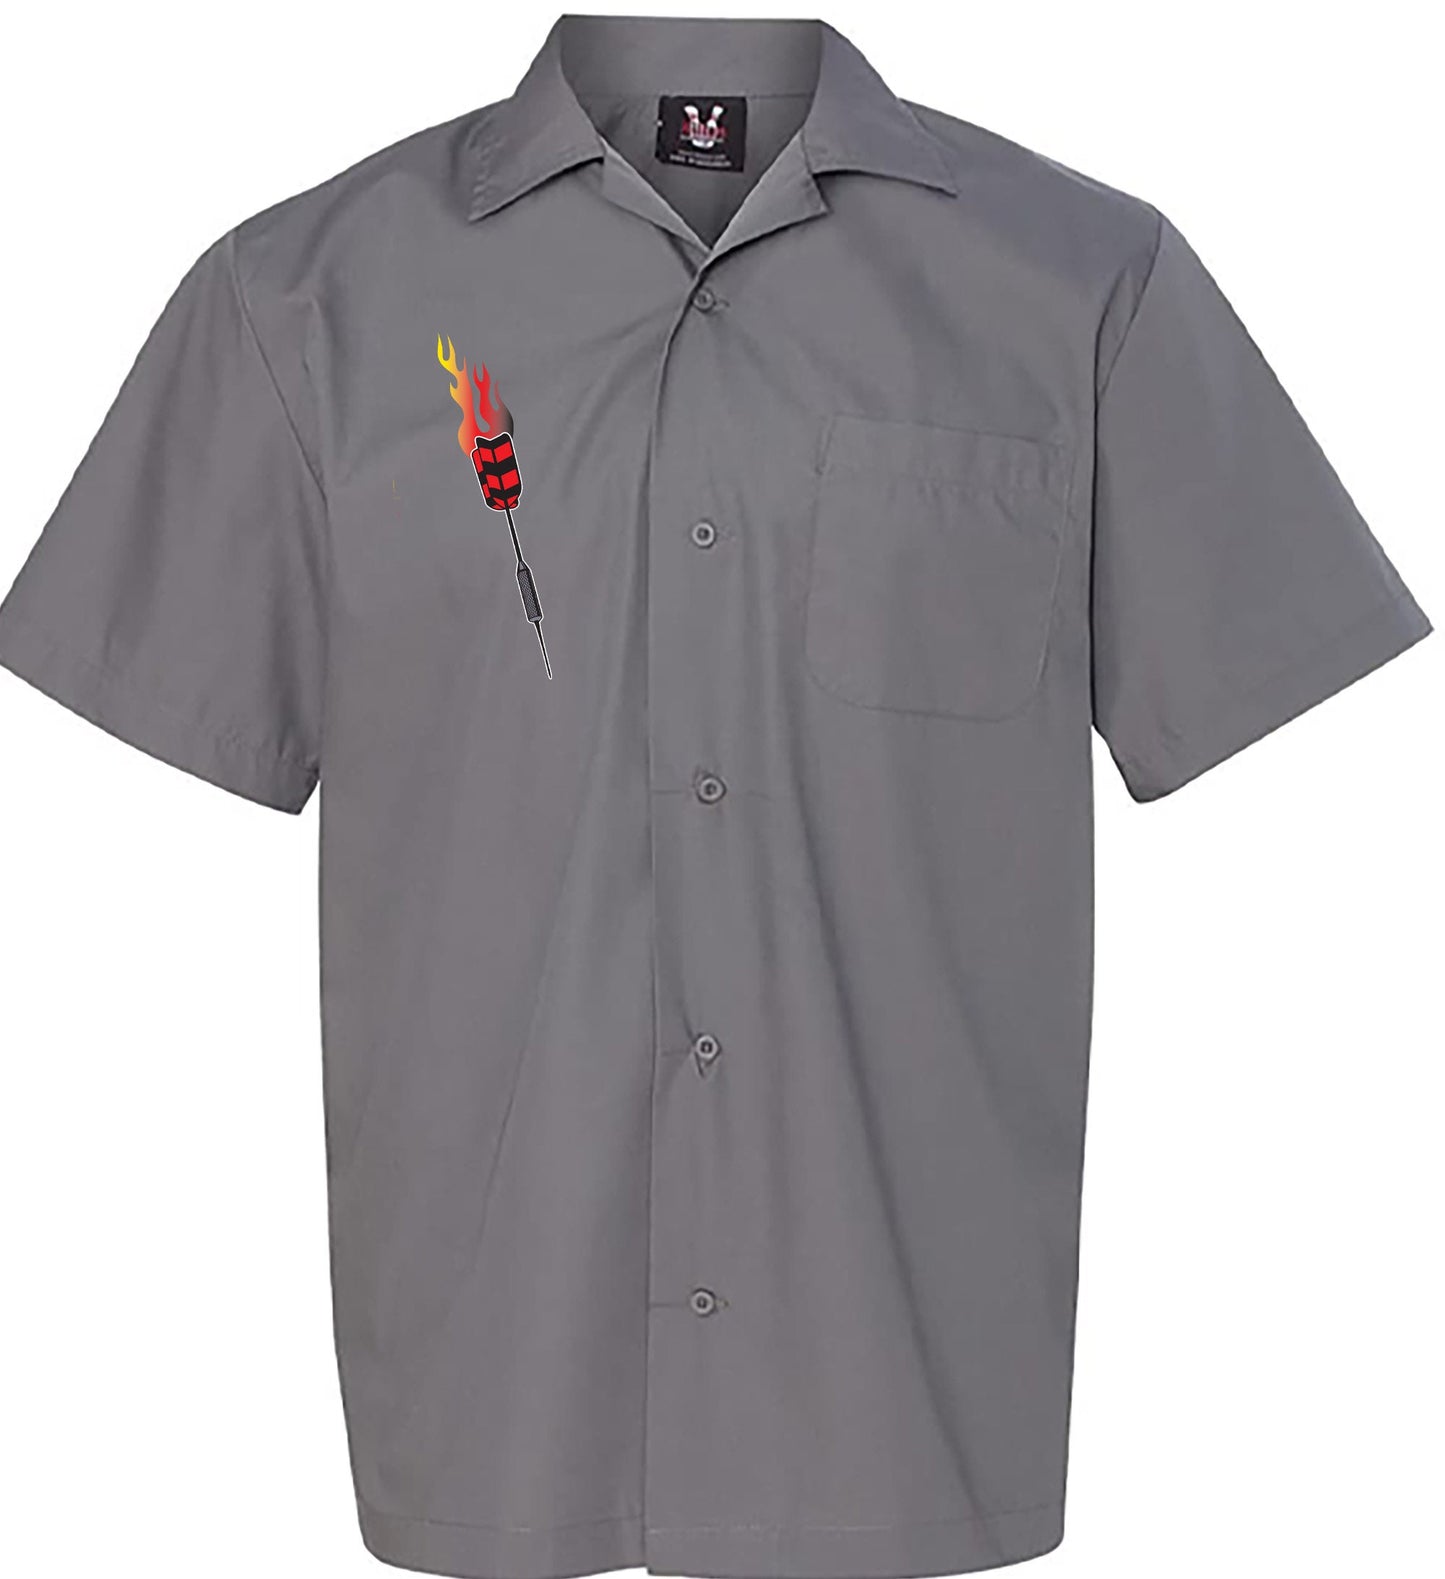 Flaming Darts Classic Retro Bowling Shirt- Vintage Bowler ( Closeout) in multiple colors  - Includes Embroidered Name #234